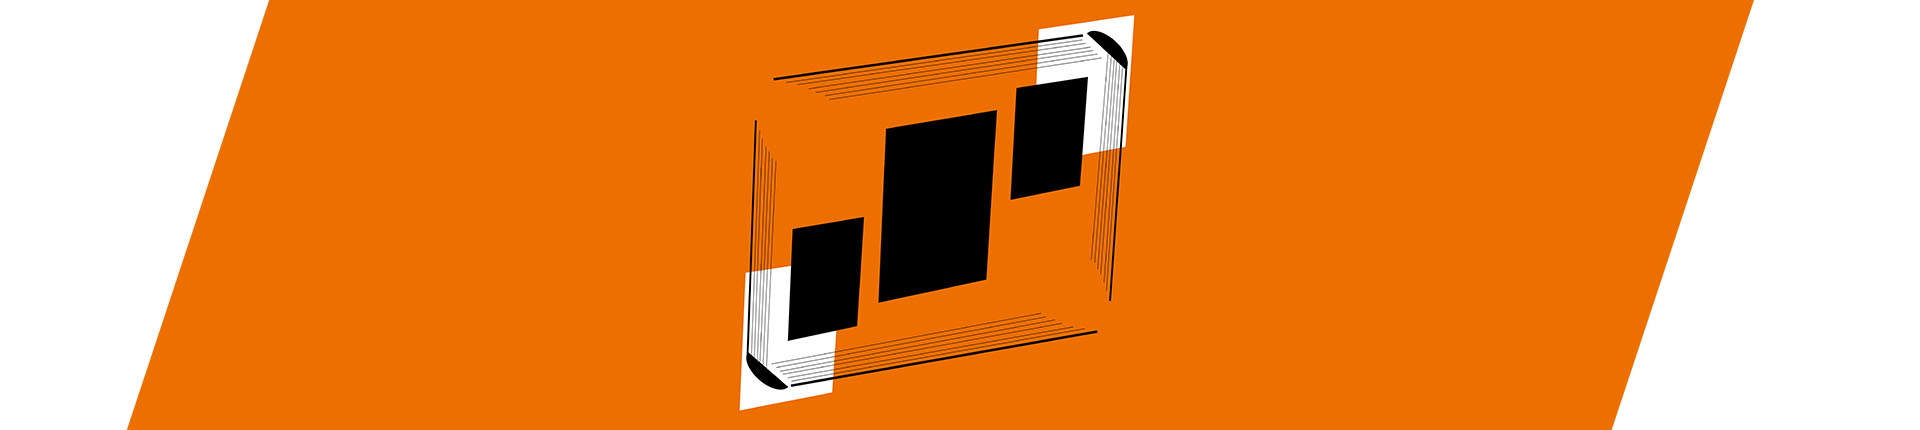 Bold, graphic of three prospective book covers in orange, black and white